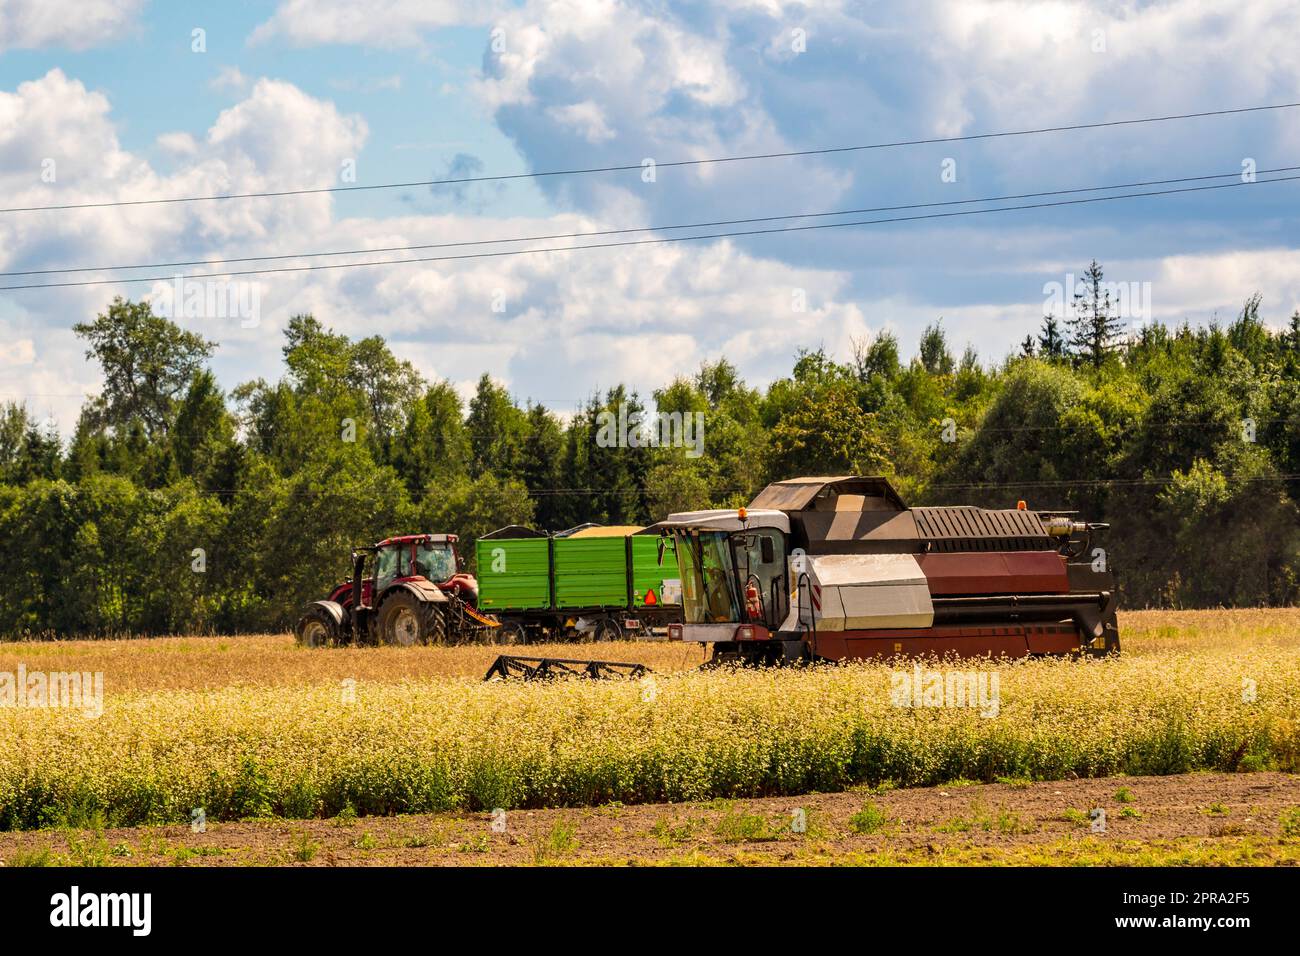 Tractor and trailer moves in a field with working combine harvester Stock Photo